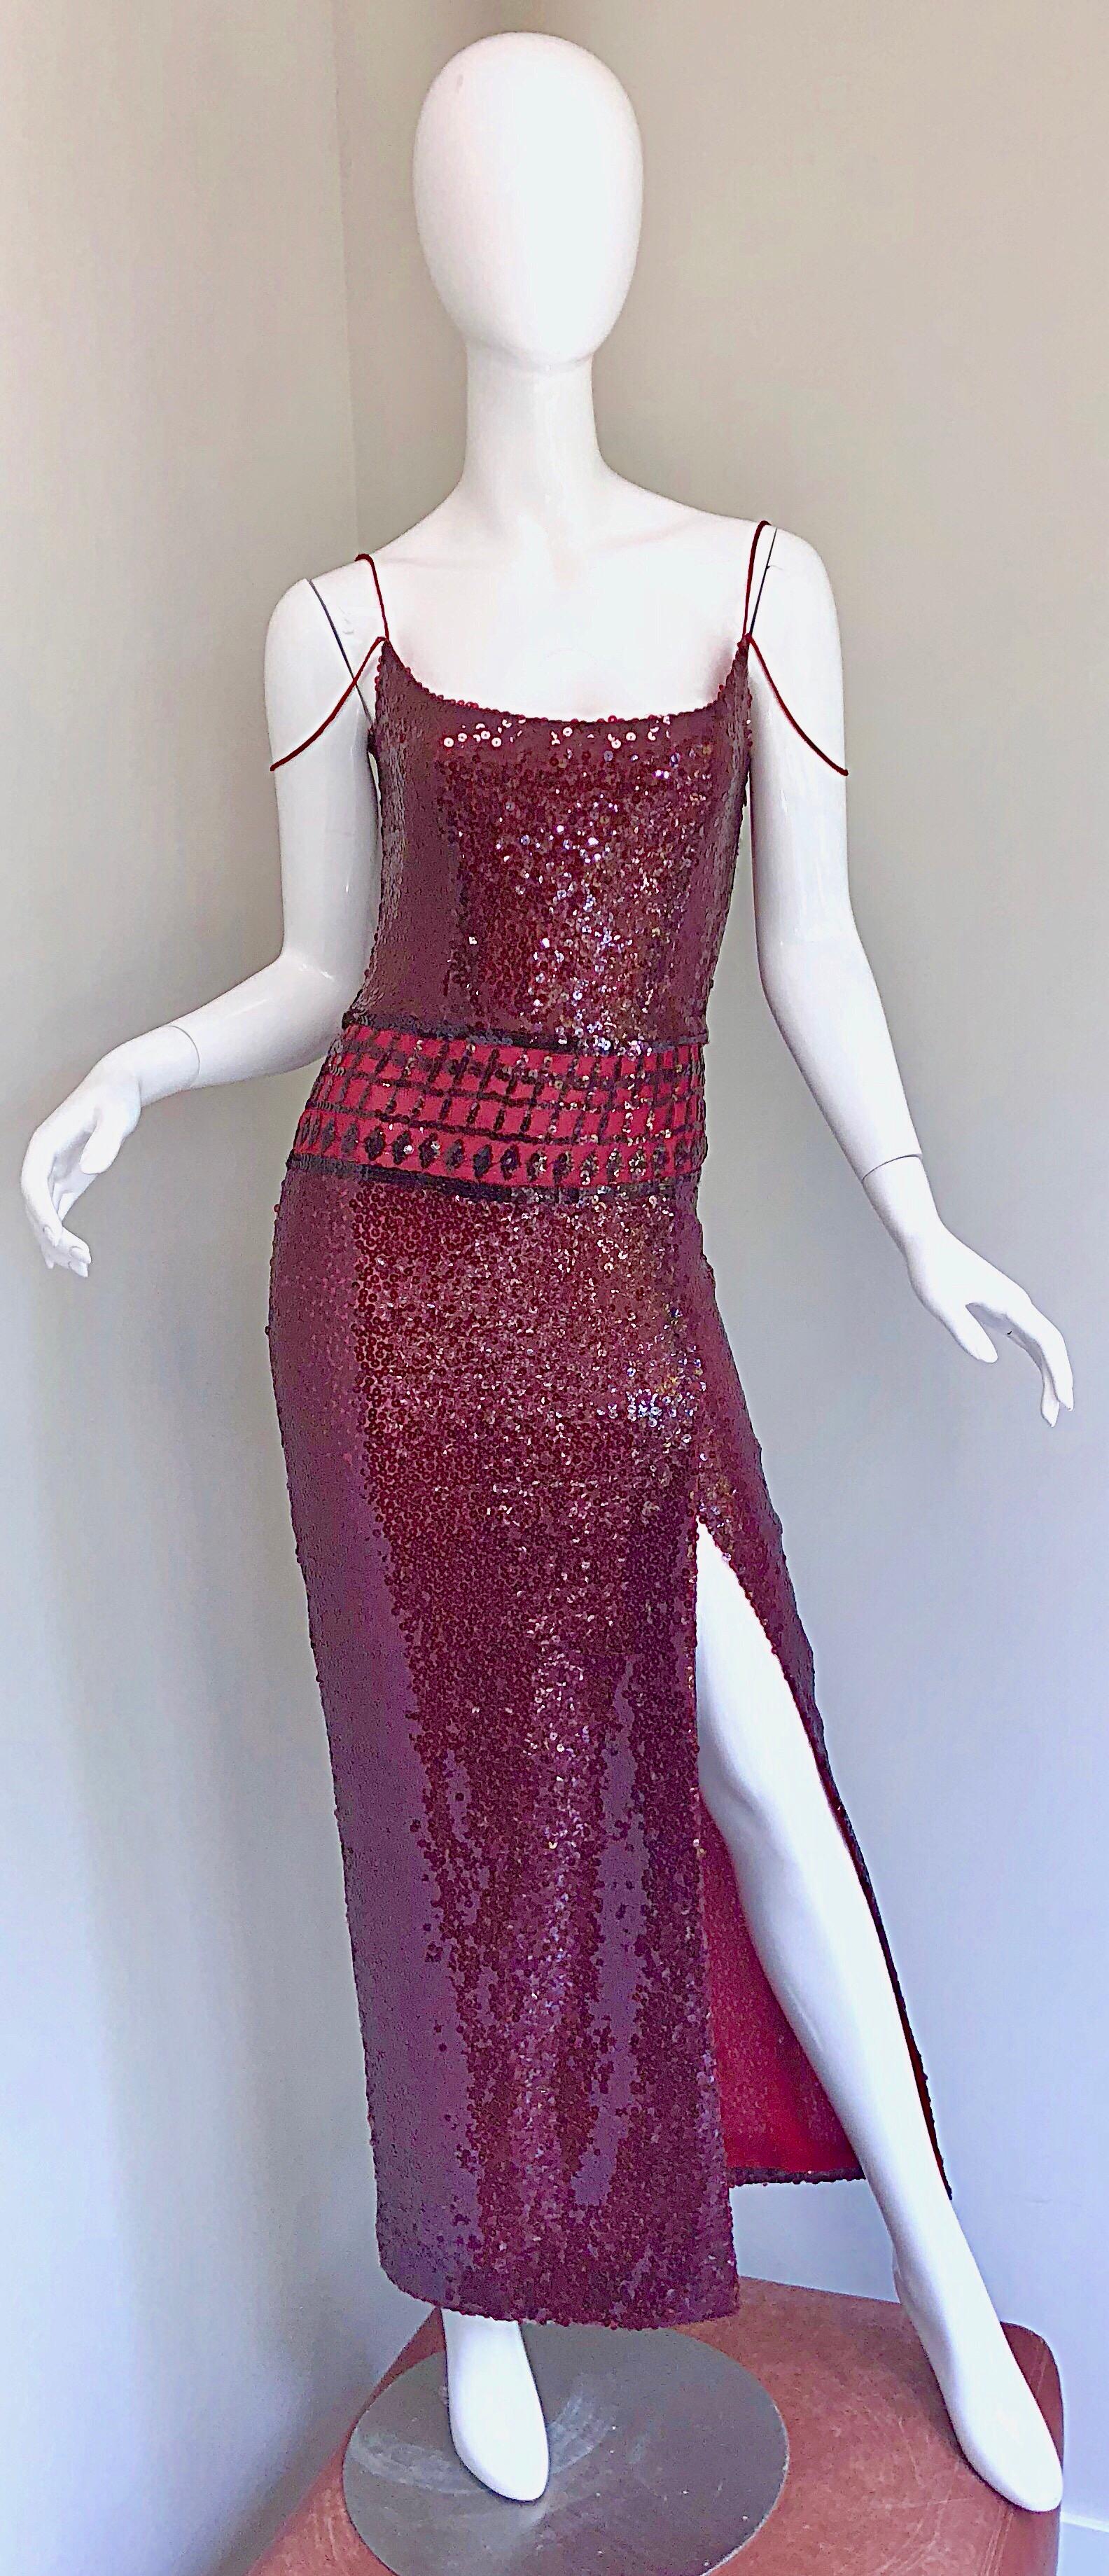 Phenomenal 90s RICHARD TYLER COUTURE cranberry red / burgundy / maroon fully sequined and beaded silk chiffon evening dress! Features thousands of vibrant hand-sewn sequins and beads throughout. Beaded spaghetti straps. One romantically drapes over